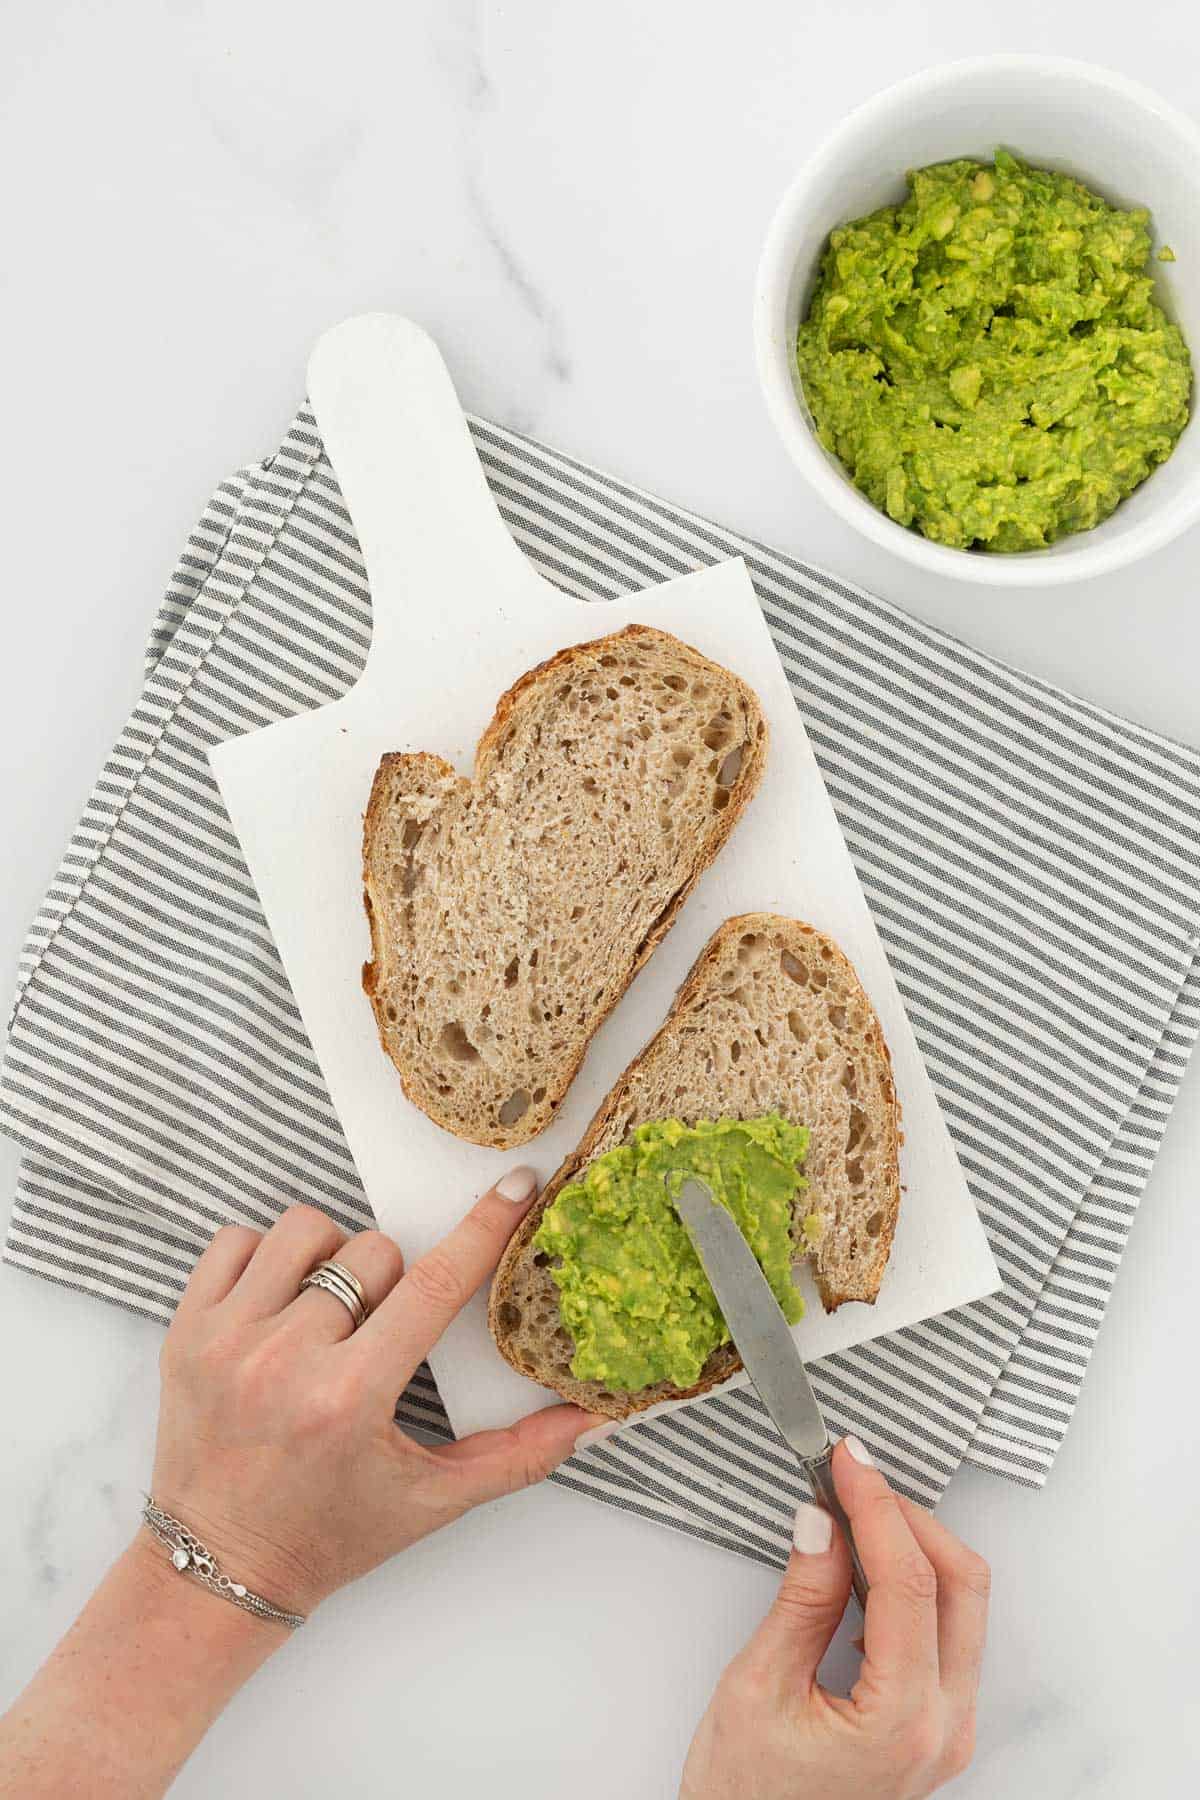 A person spreading mashed avocado on slices of bread for a sandwich.